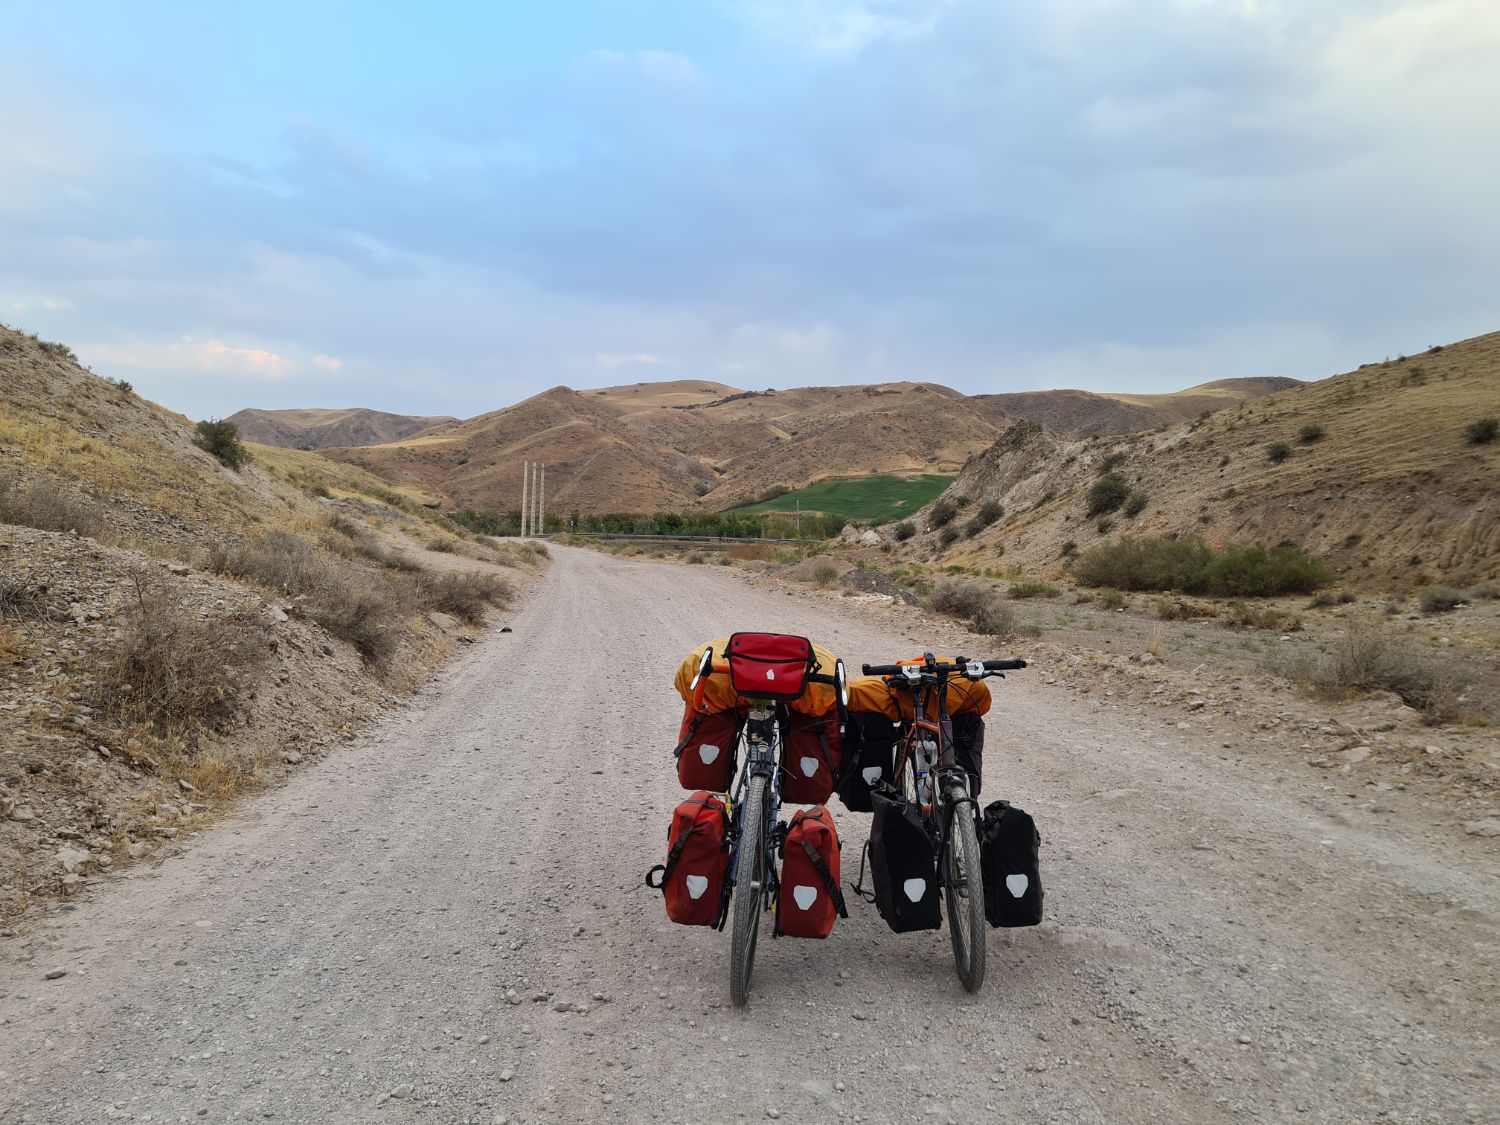 Our bikes, not knowing this was not the gravel road to take